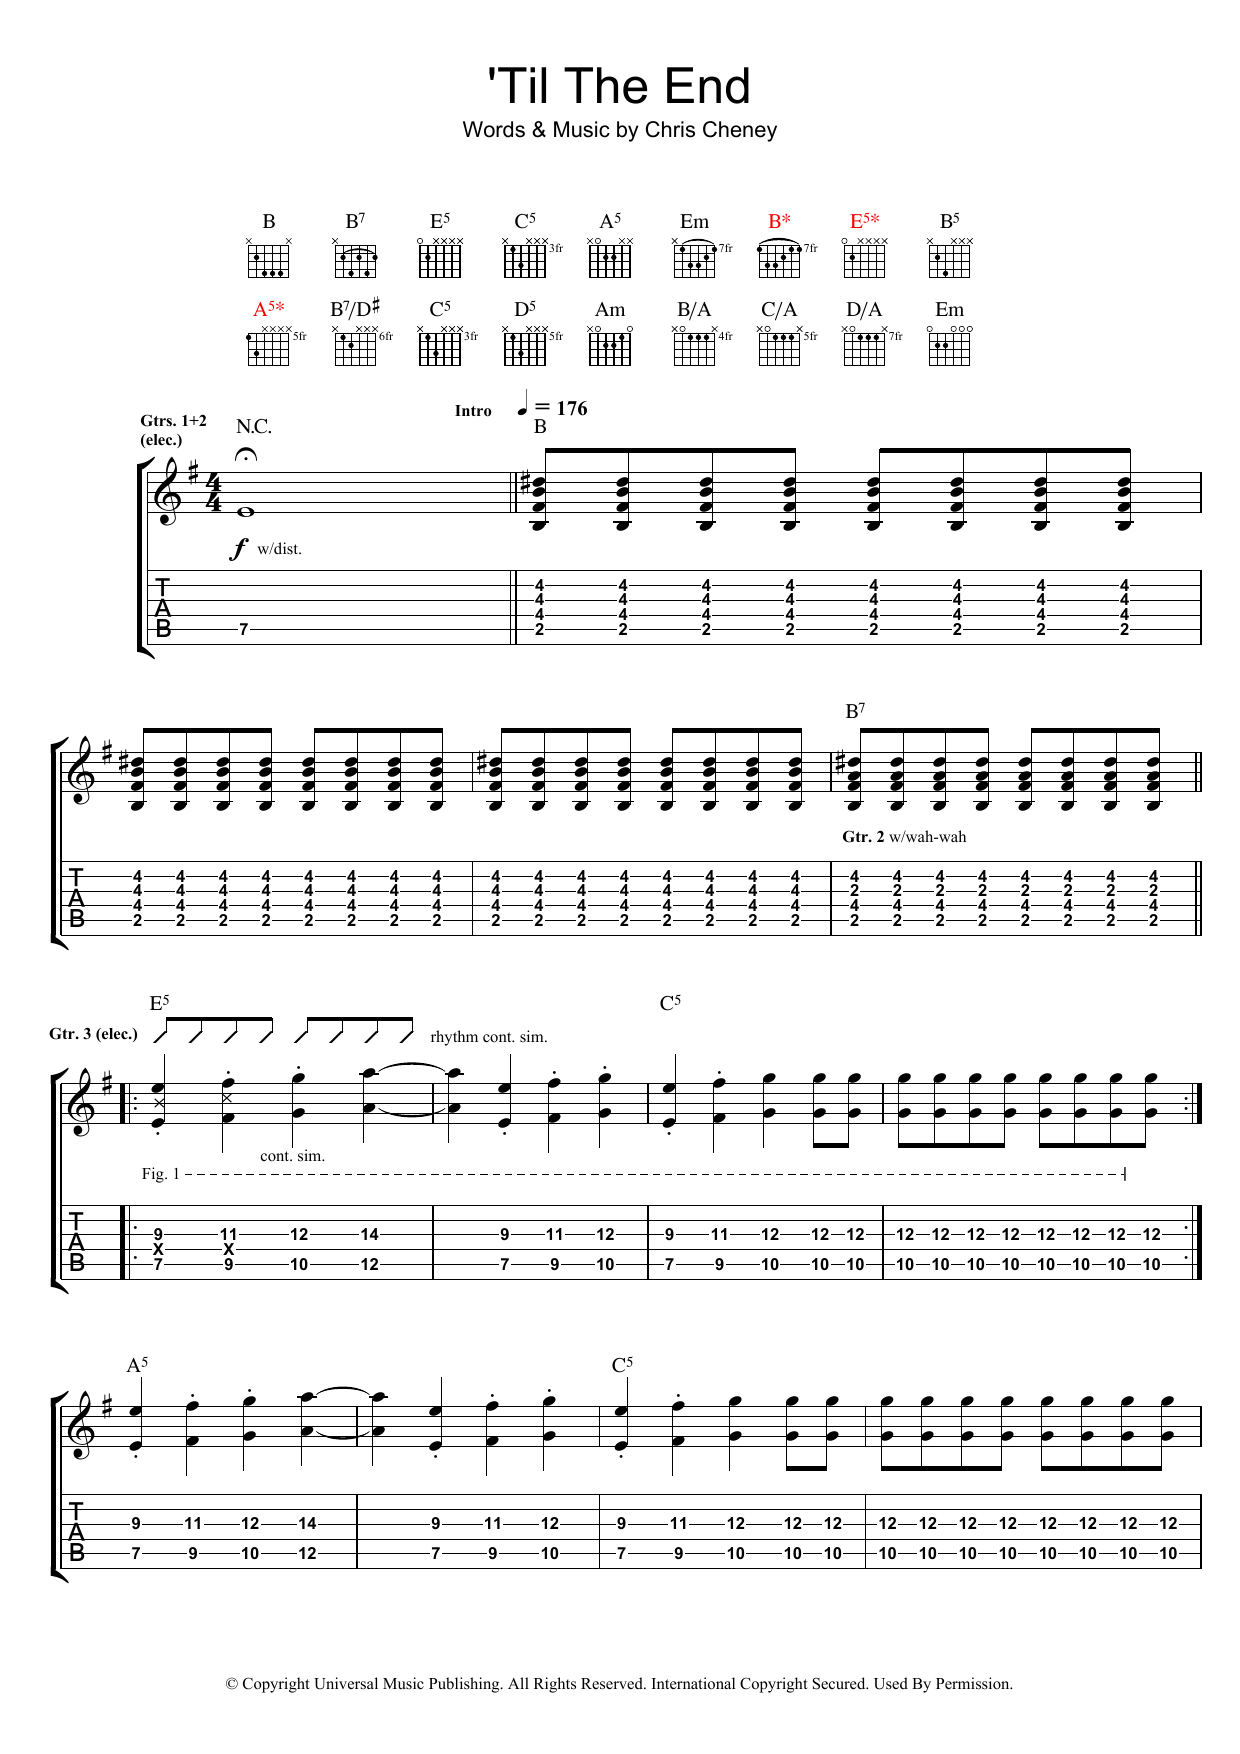 Download The Living End 'Til The End sheet music notes and chords for Guitar Tab - Download Printable PDF and start playing in minutes.